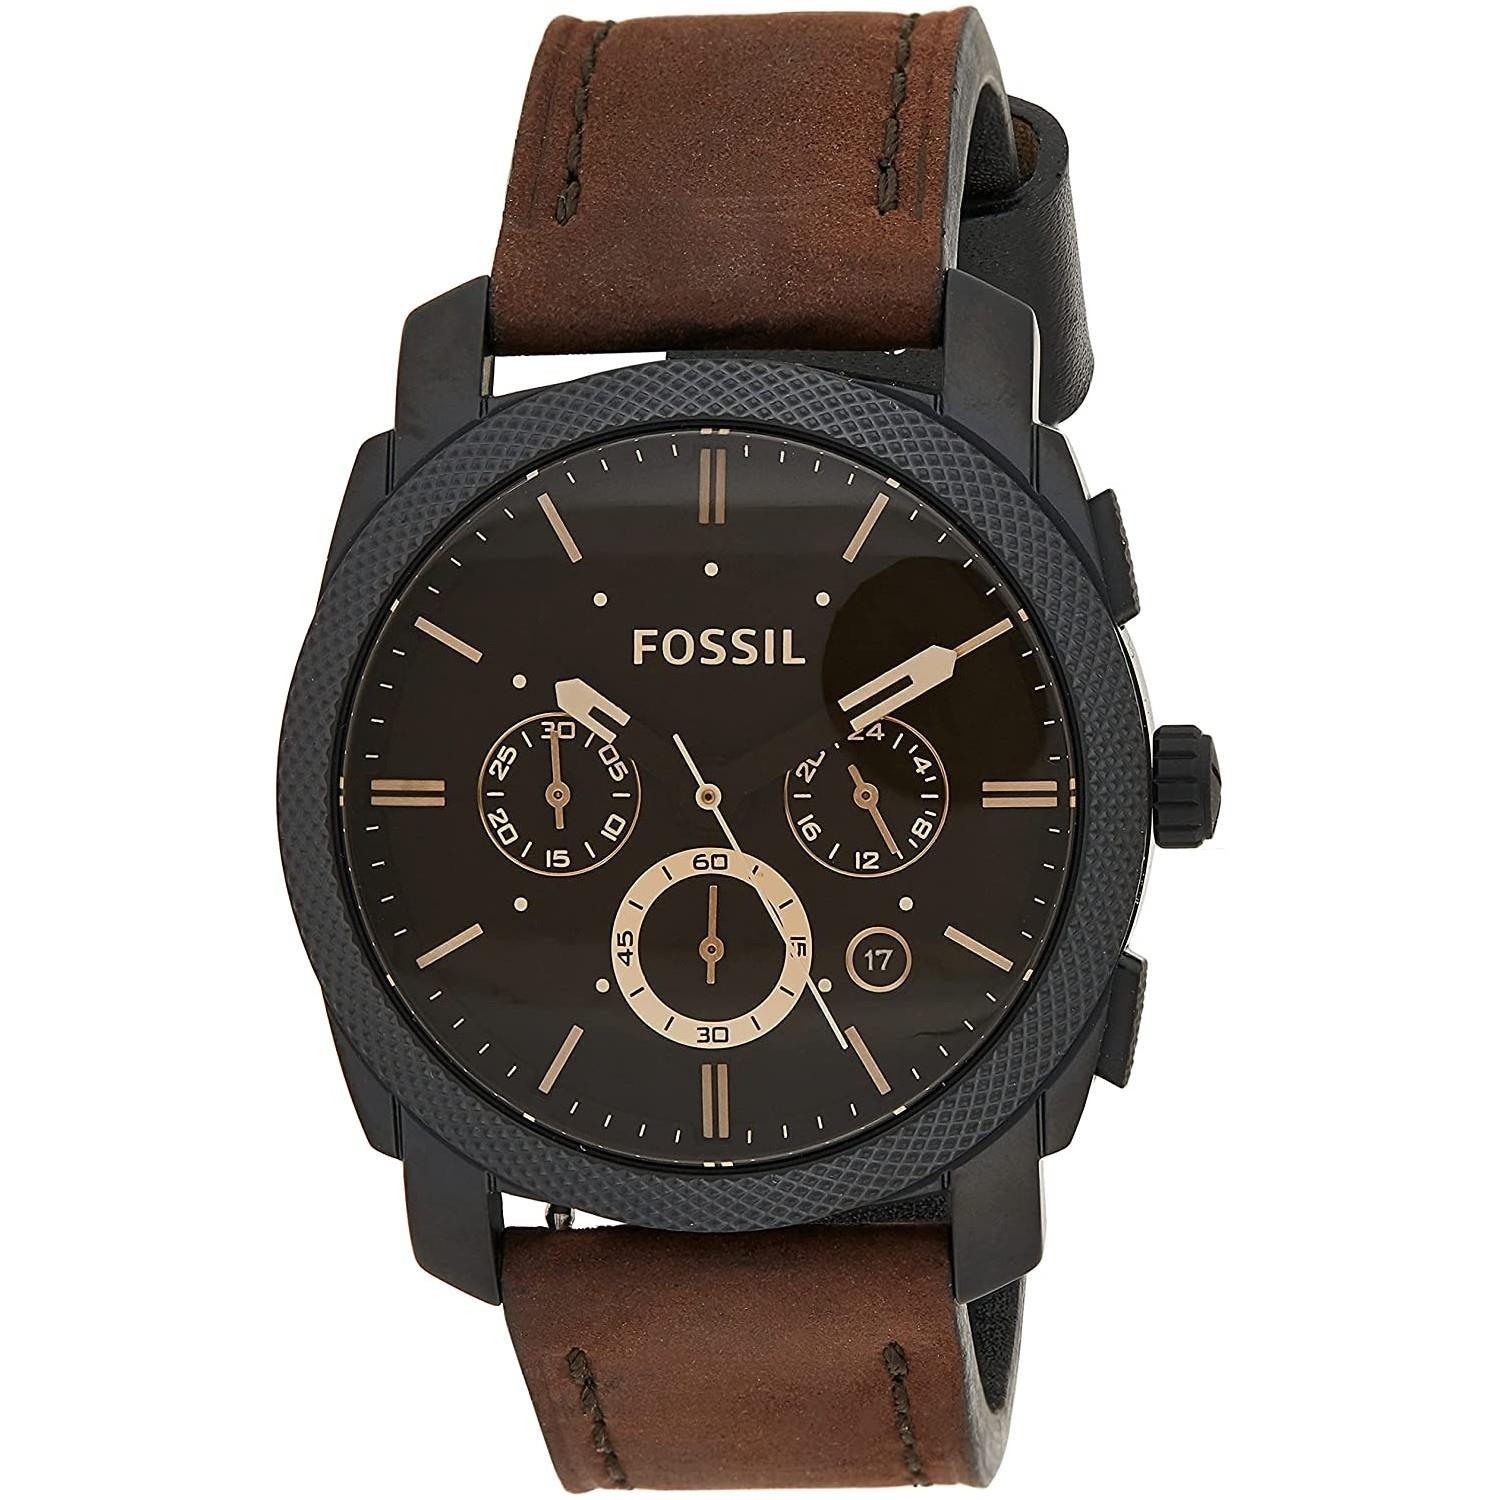 Fossil FS4656 Brown Leather Chronograph Quartz Men's Watch - Watch Home™